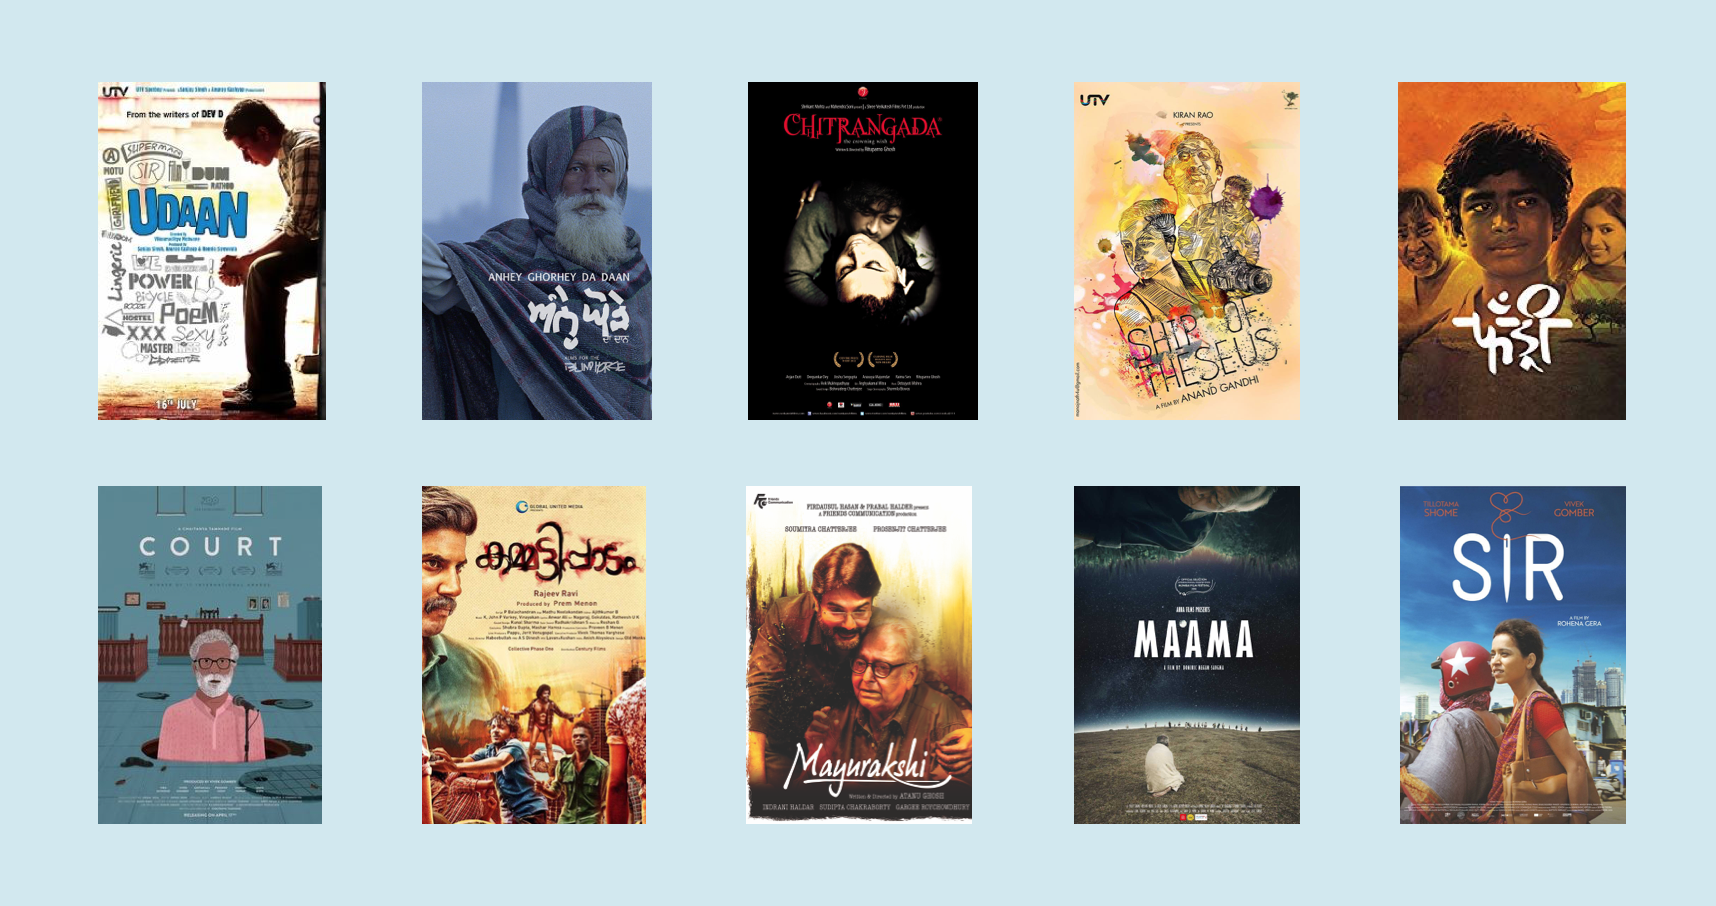 The Indian Films of the Decade, as seen by Siddhant Adlakha